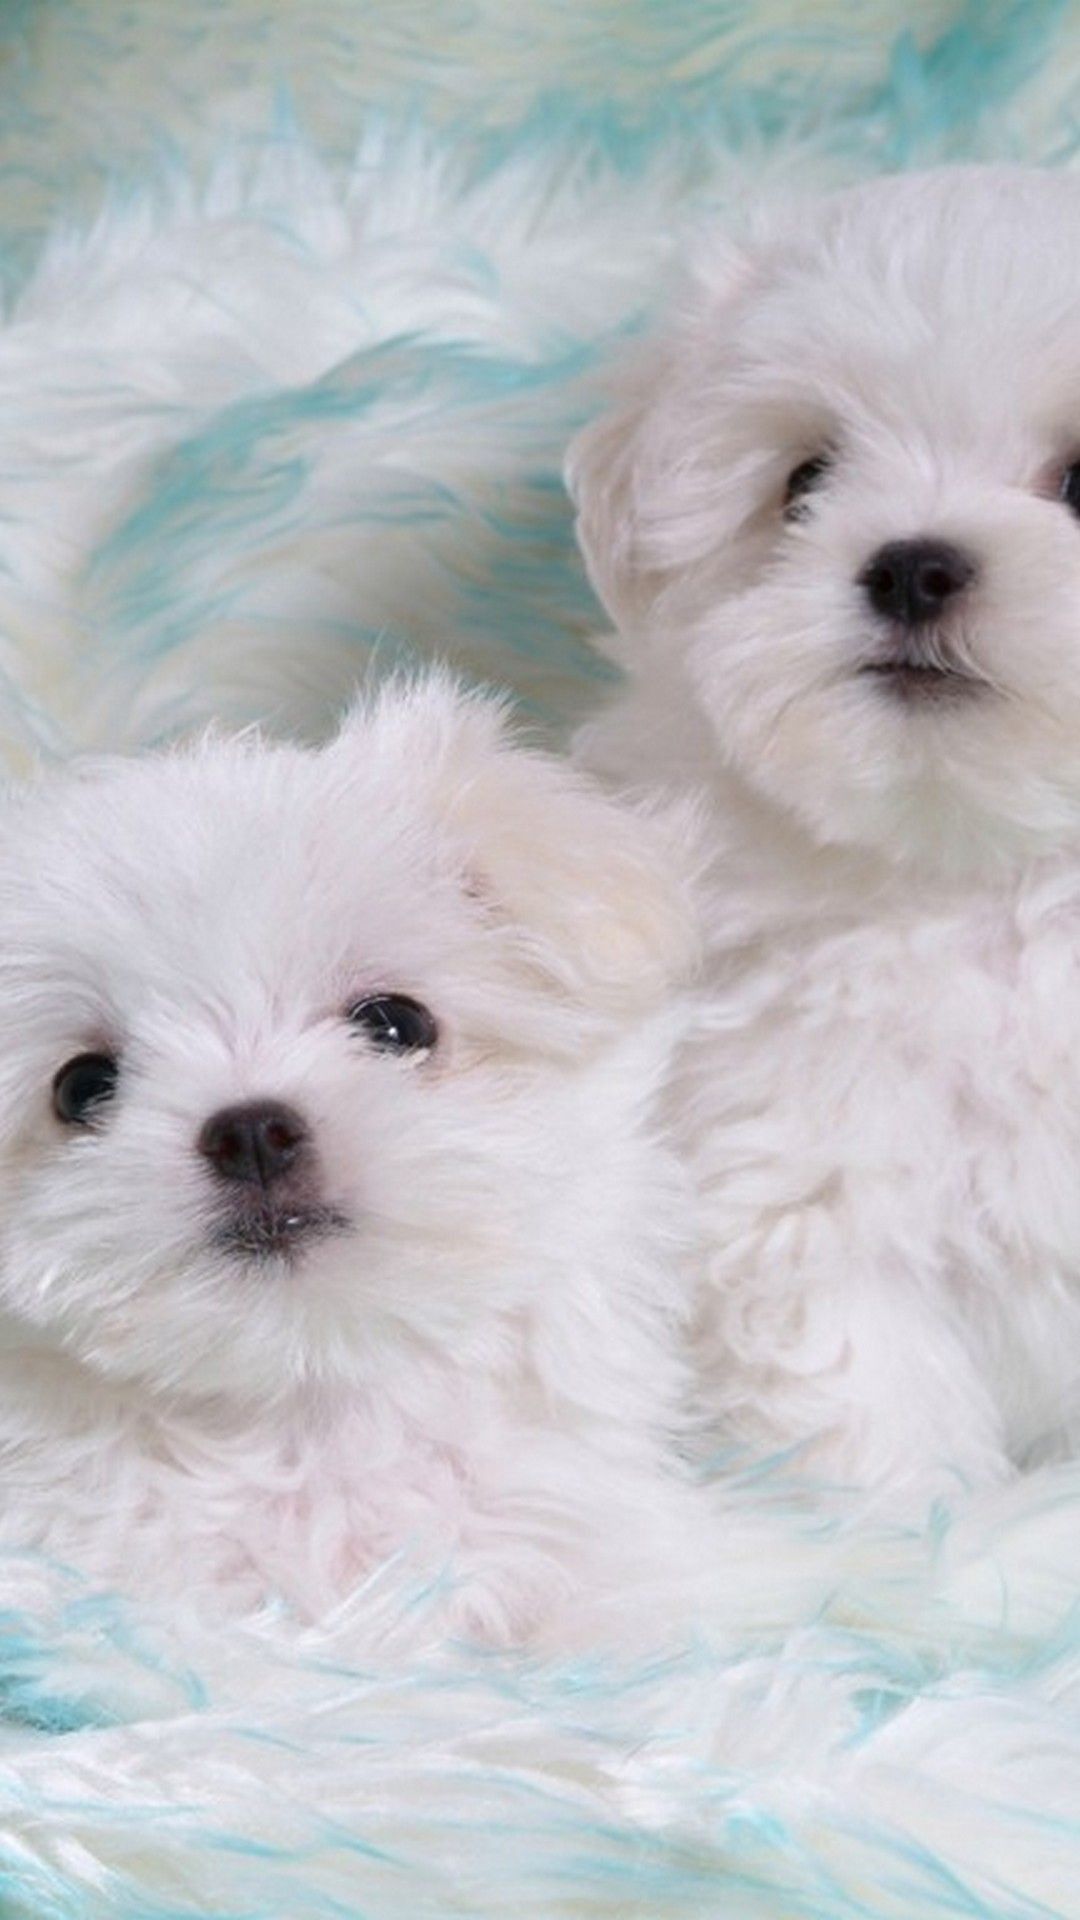 Maltese Puppies Wallpaper 04 Best Free Maltese Puppies Background For Android. Cute puppies, Puppy background, Puppy picture